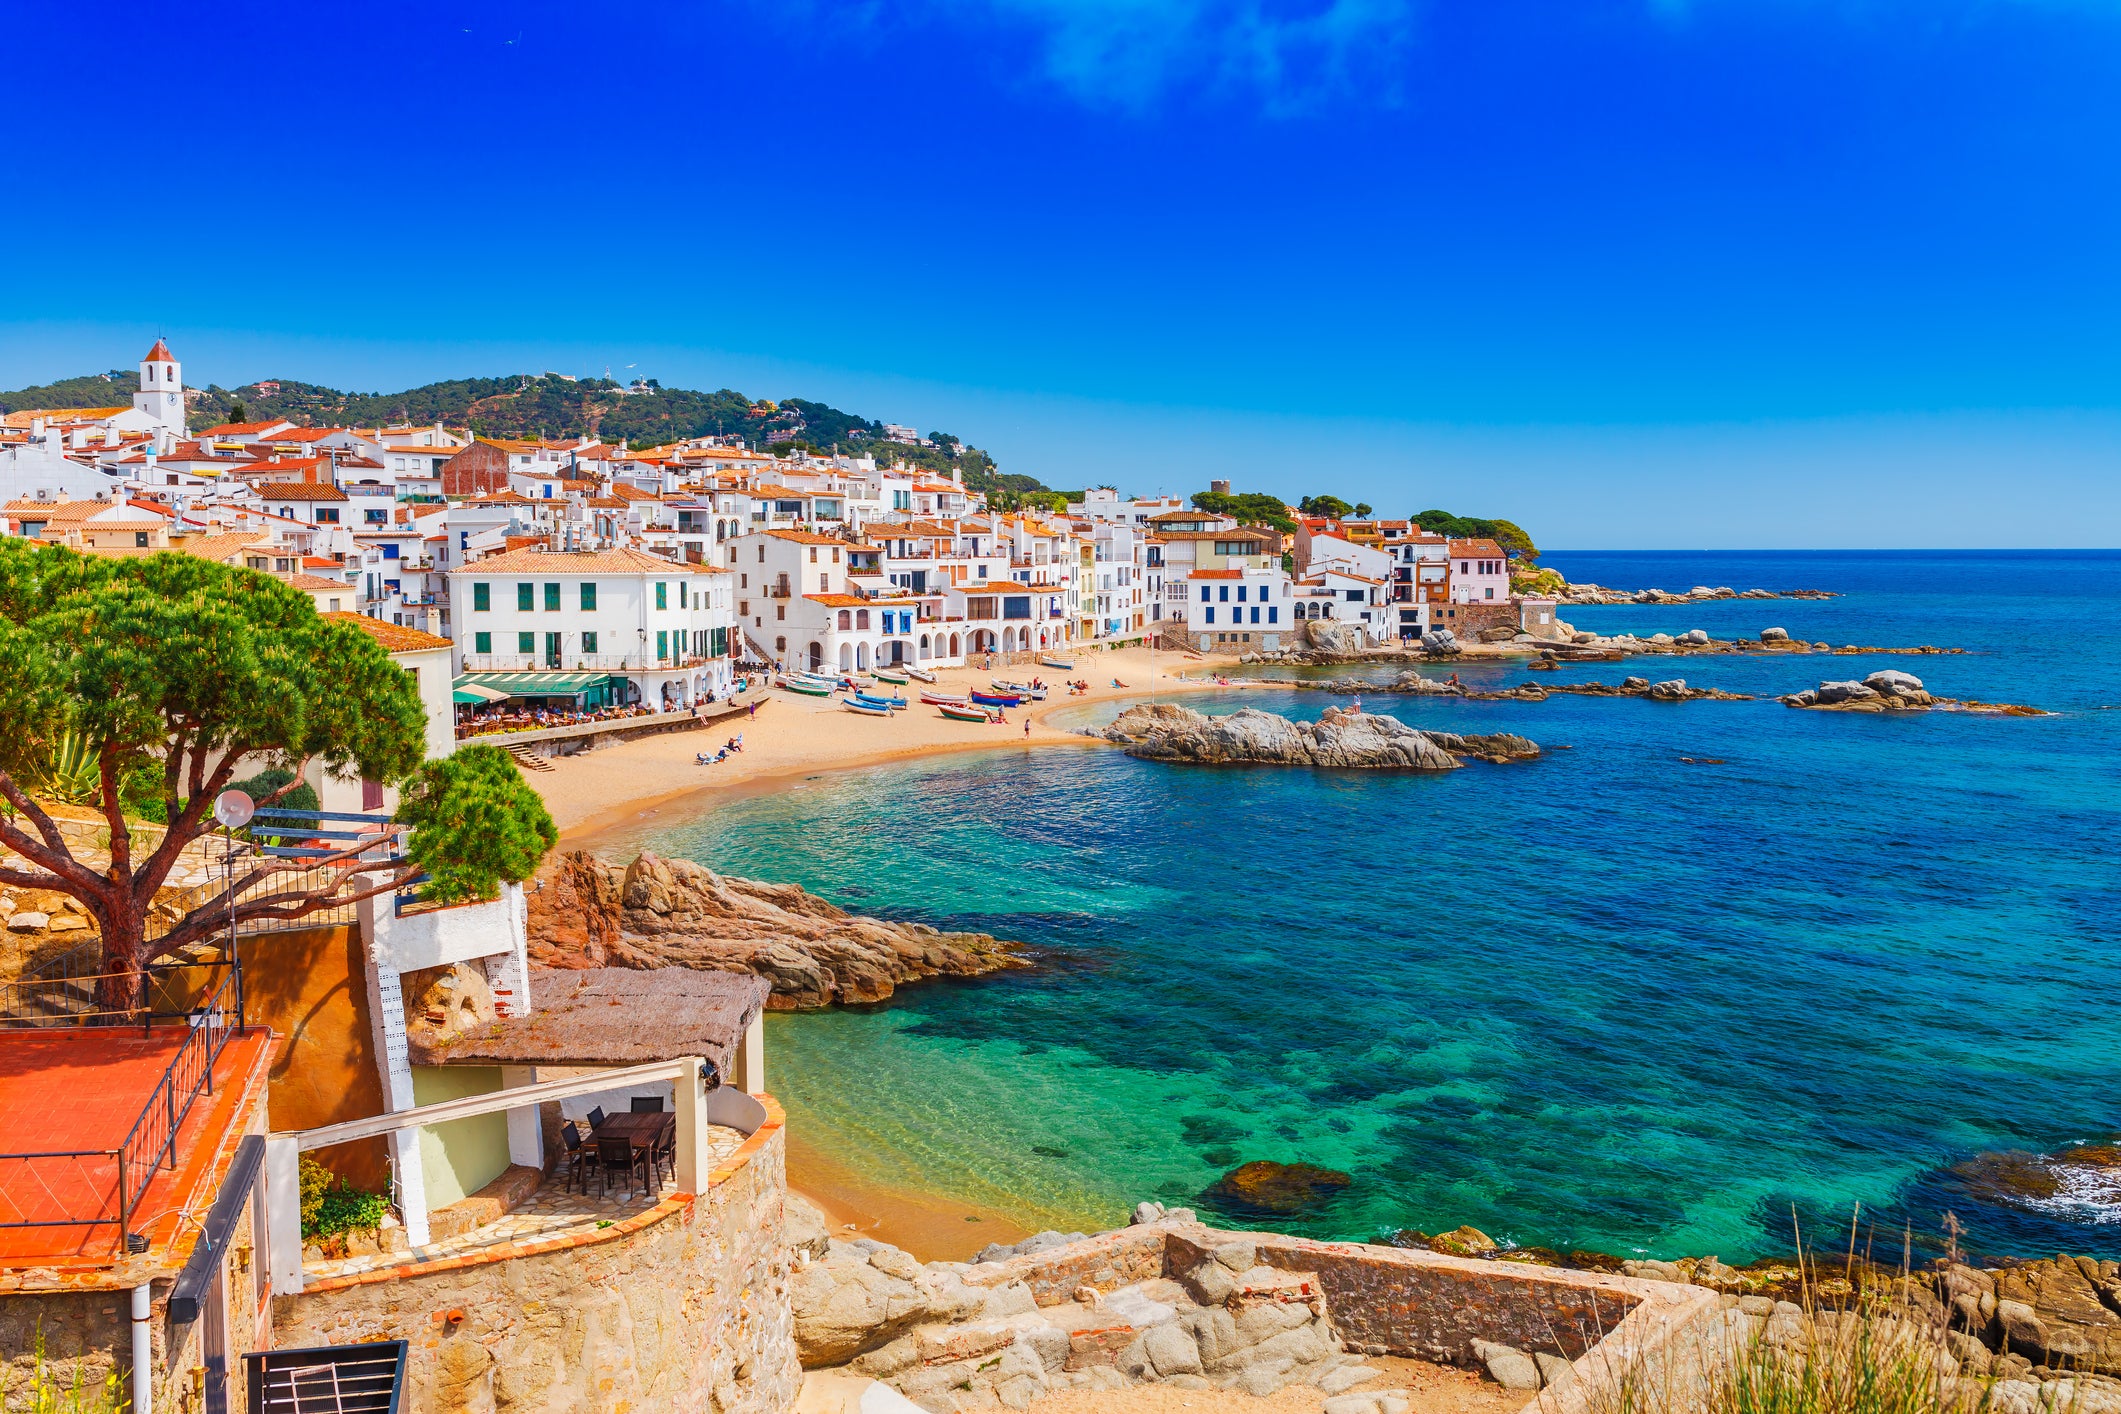 Buzzing cities and idyllic islands attract millions to Spain’s shores